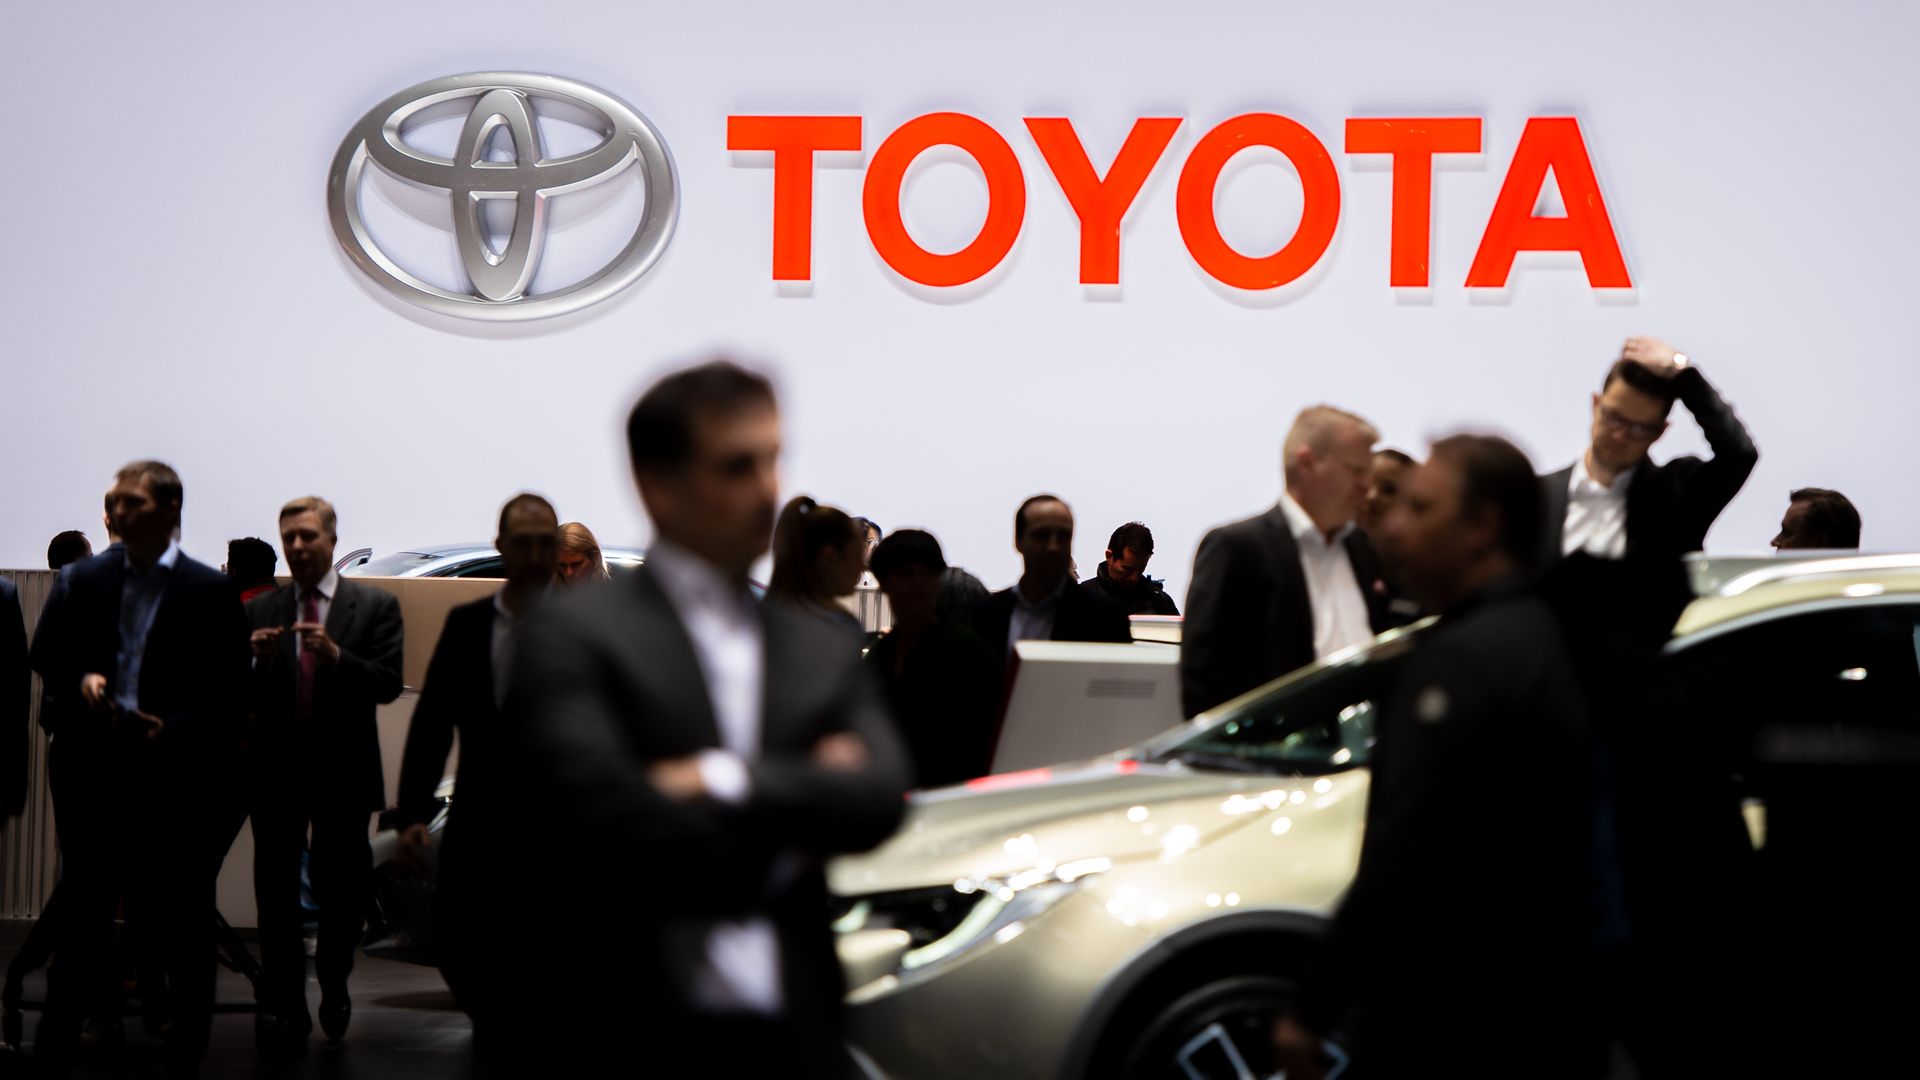 In this image, crowds of mostly suited people walk around a show floor with the Toyota logo overhead. 